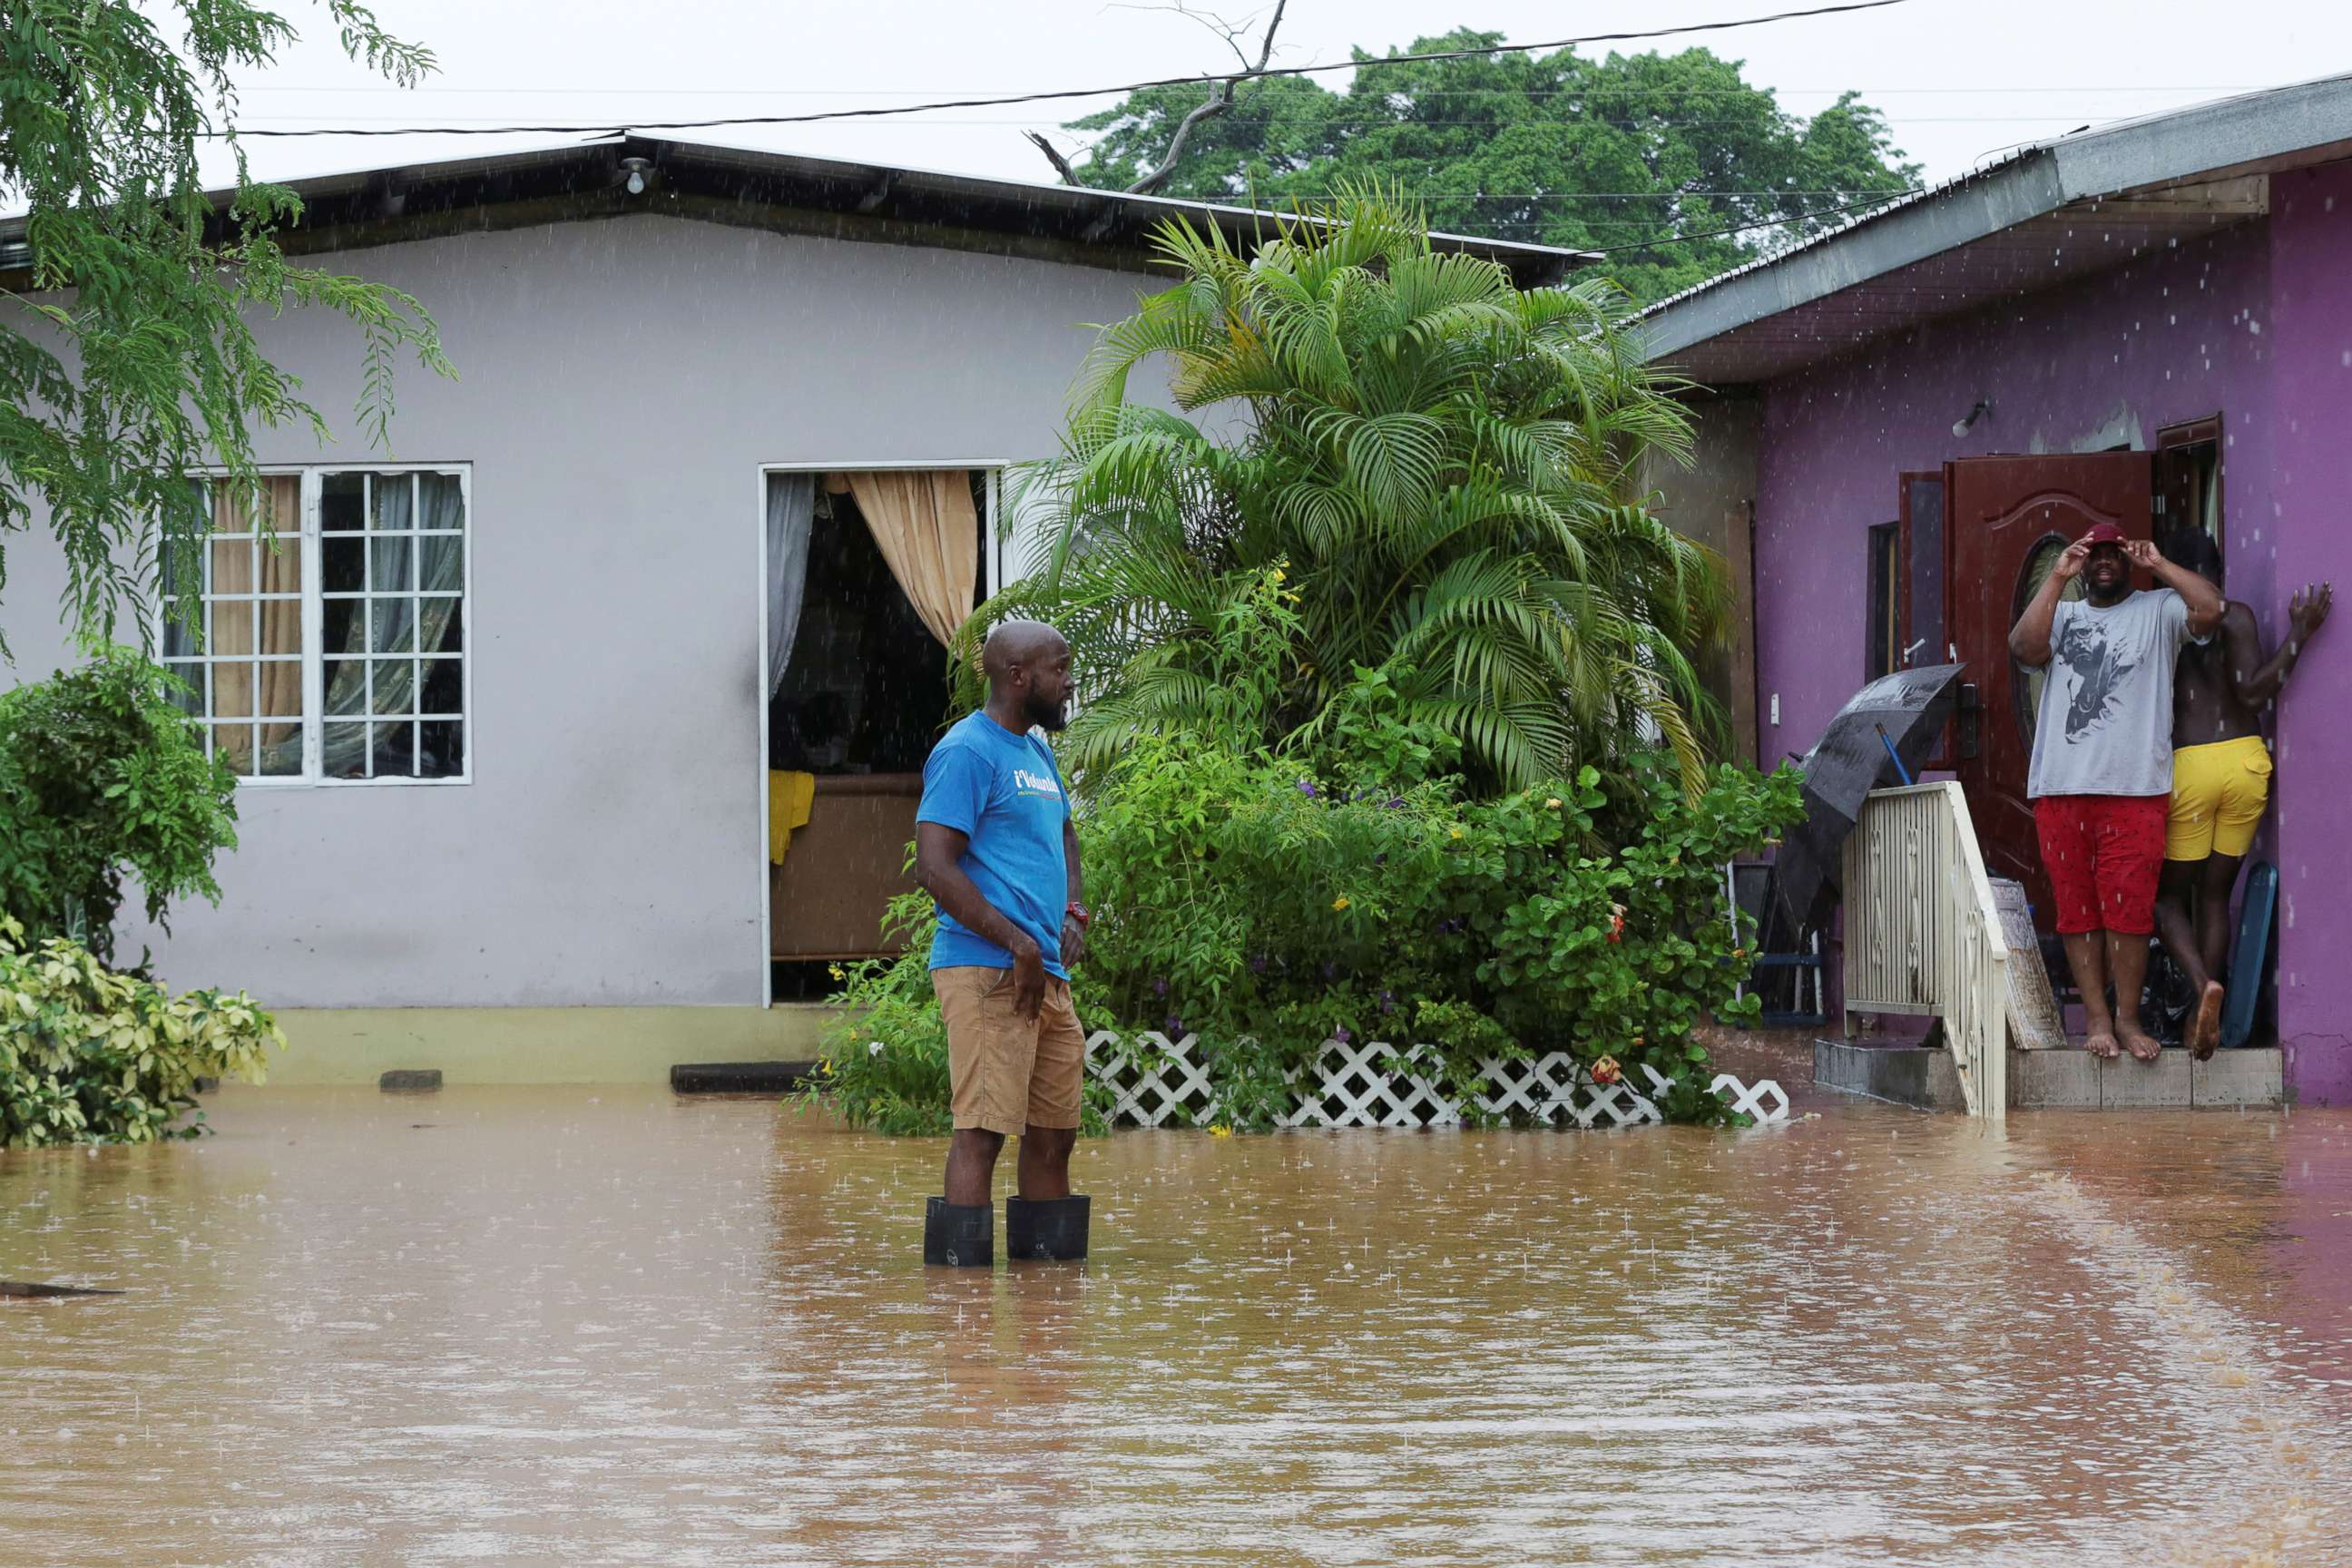 PHOTO: A resident wades through an area flooded by a rain storm caused by Tropical Storm Karen in Barataria, Trinidad and Tobago, Sept. 22, 2019.